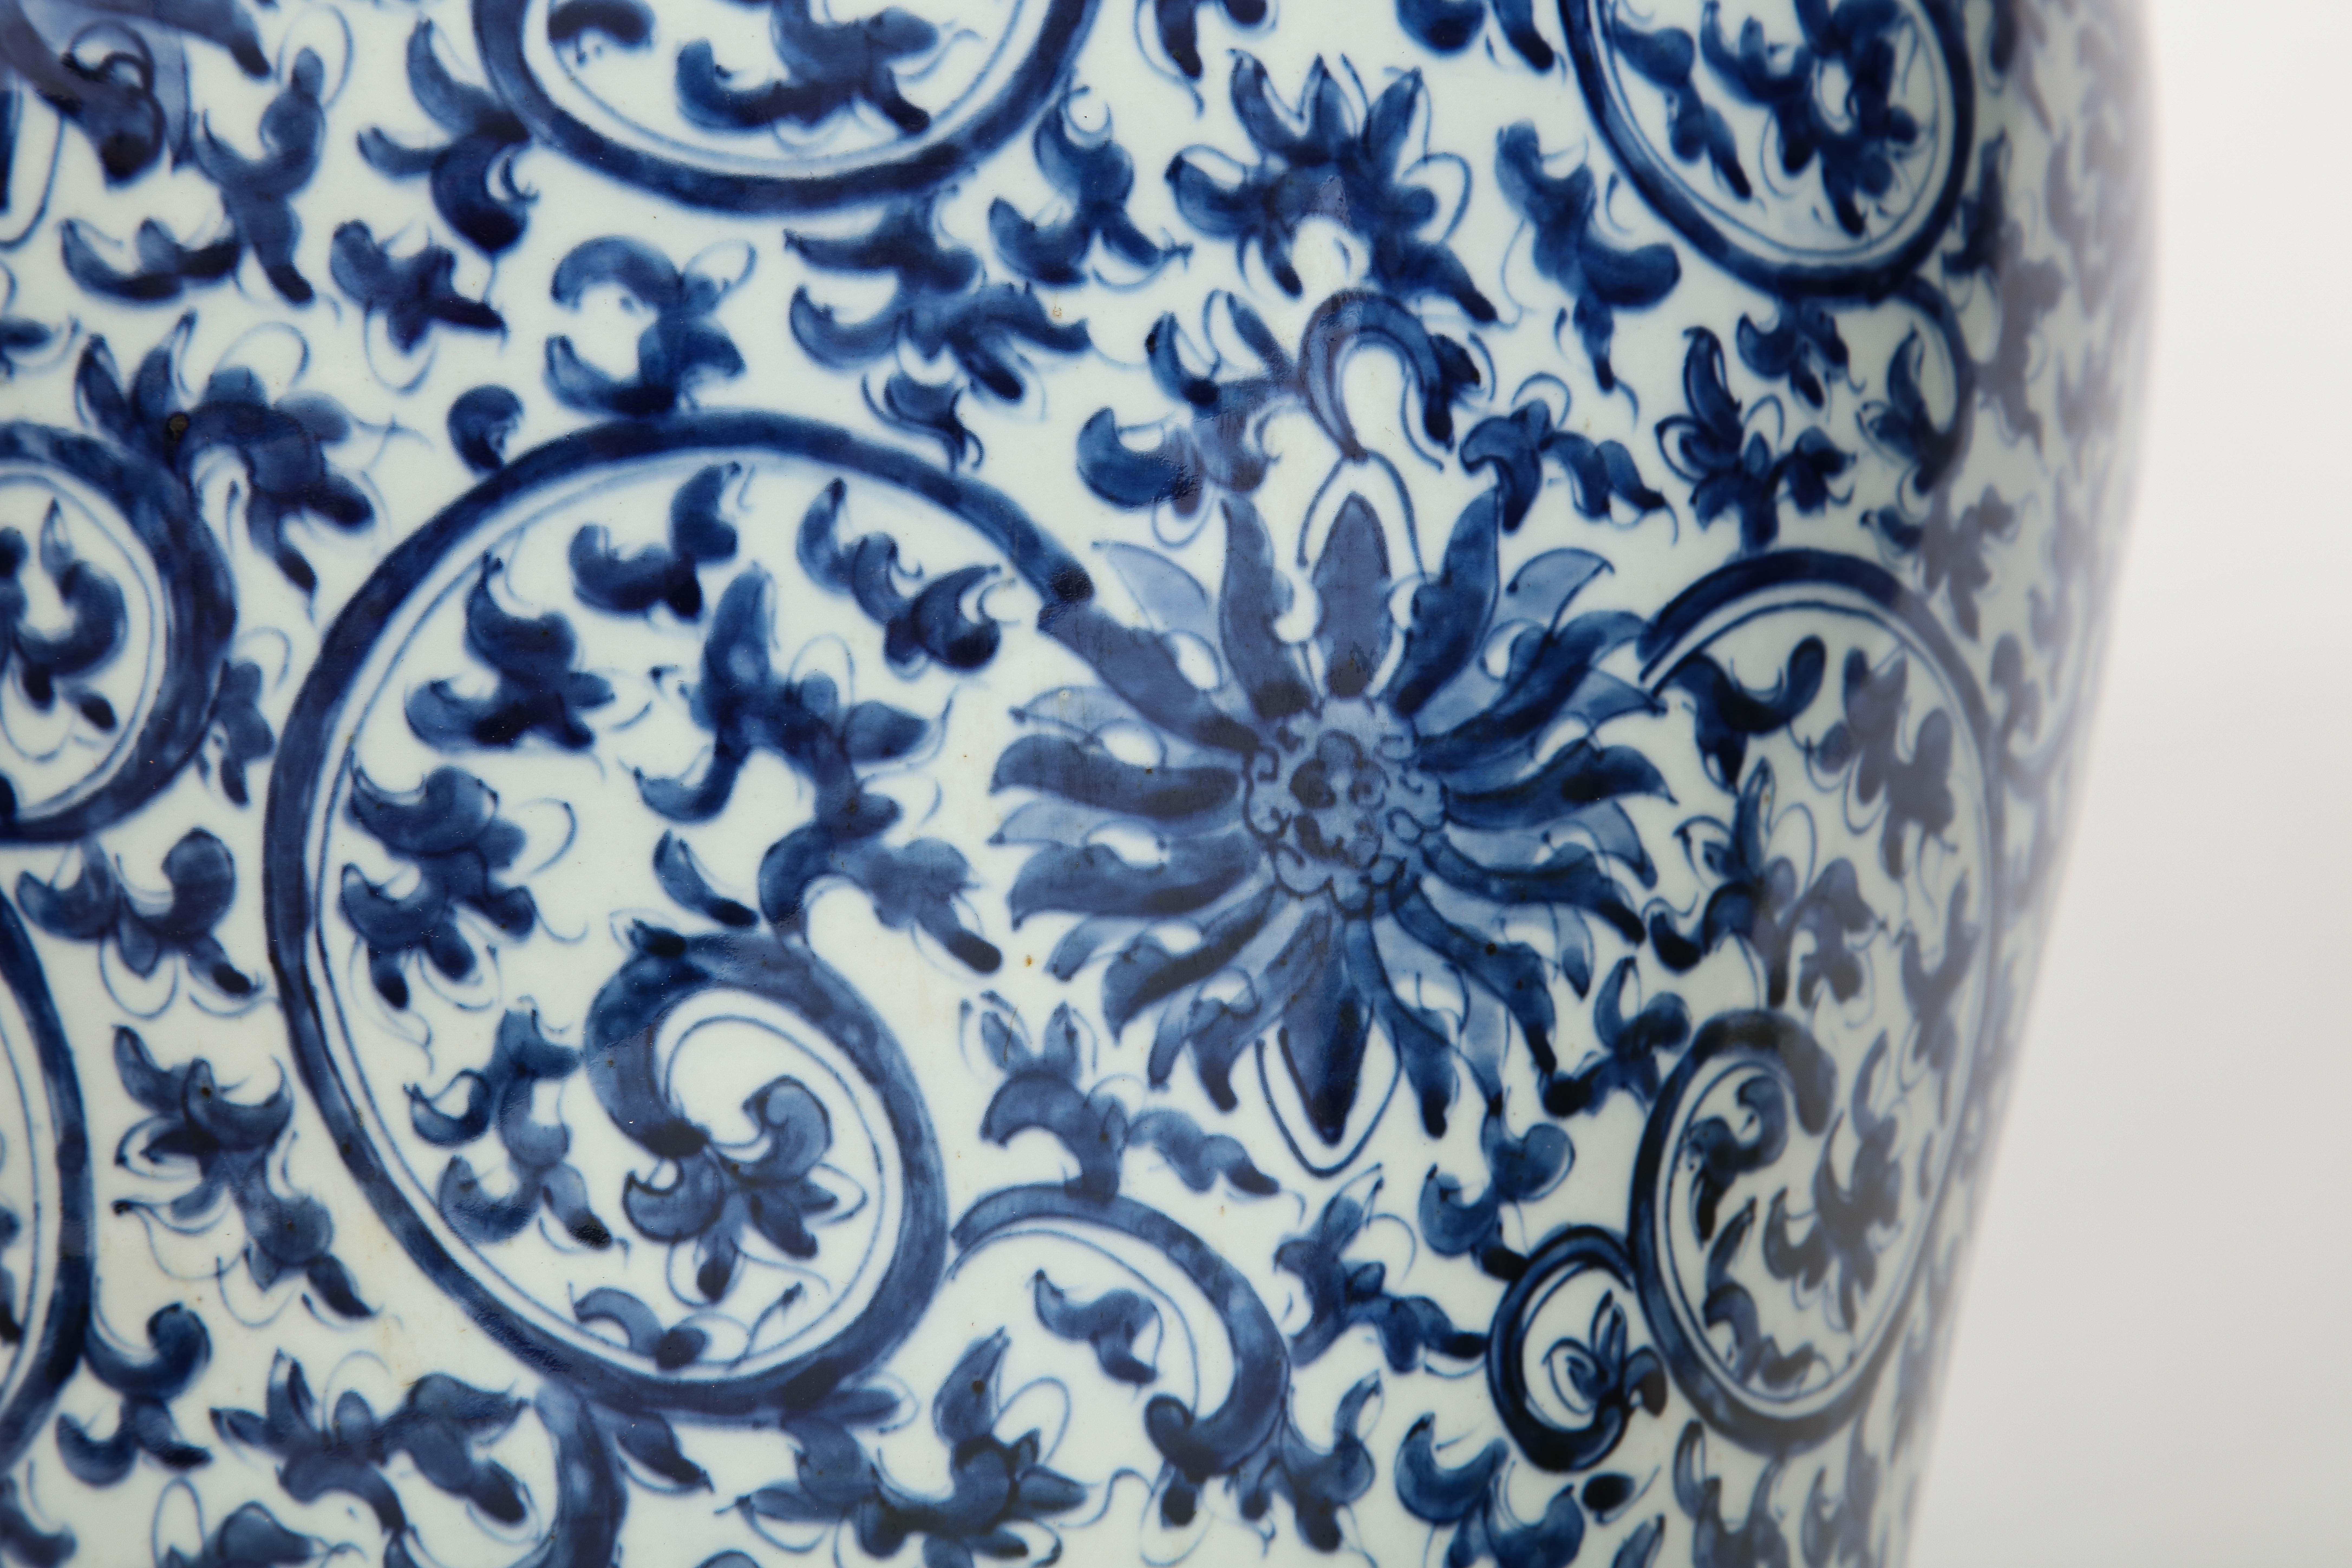 Pair of 19th Century Qing Dynasty Chinese Blue and White Vases Turned to Lamps For Sale 5